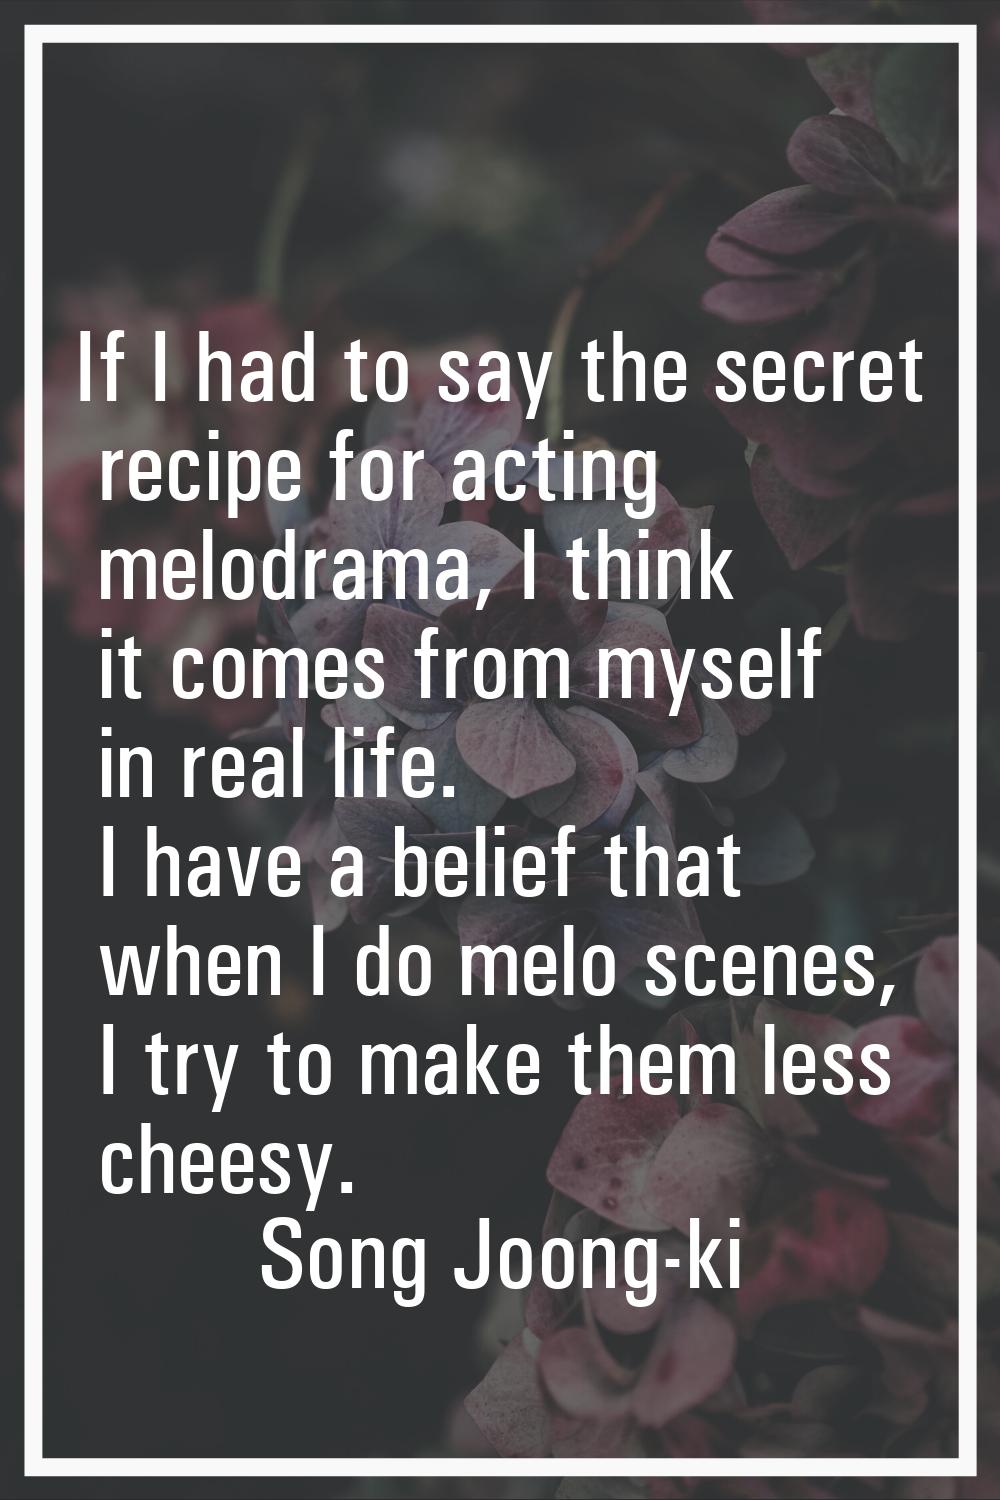 If I had to say the secret recipe for acting melodrama, I think it comes from myself in real life. 